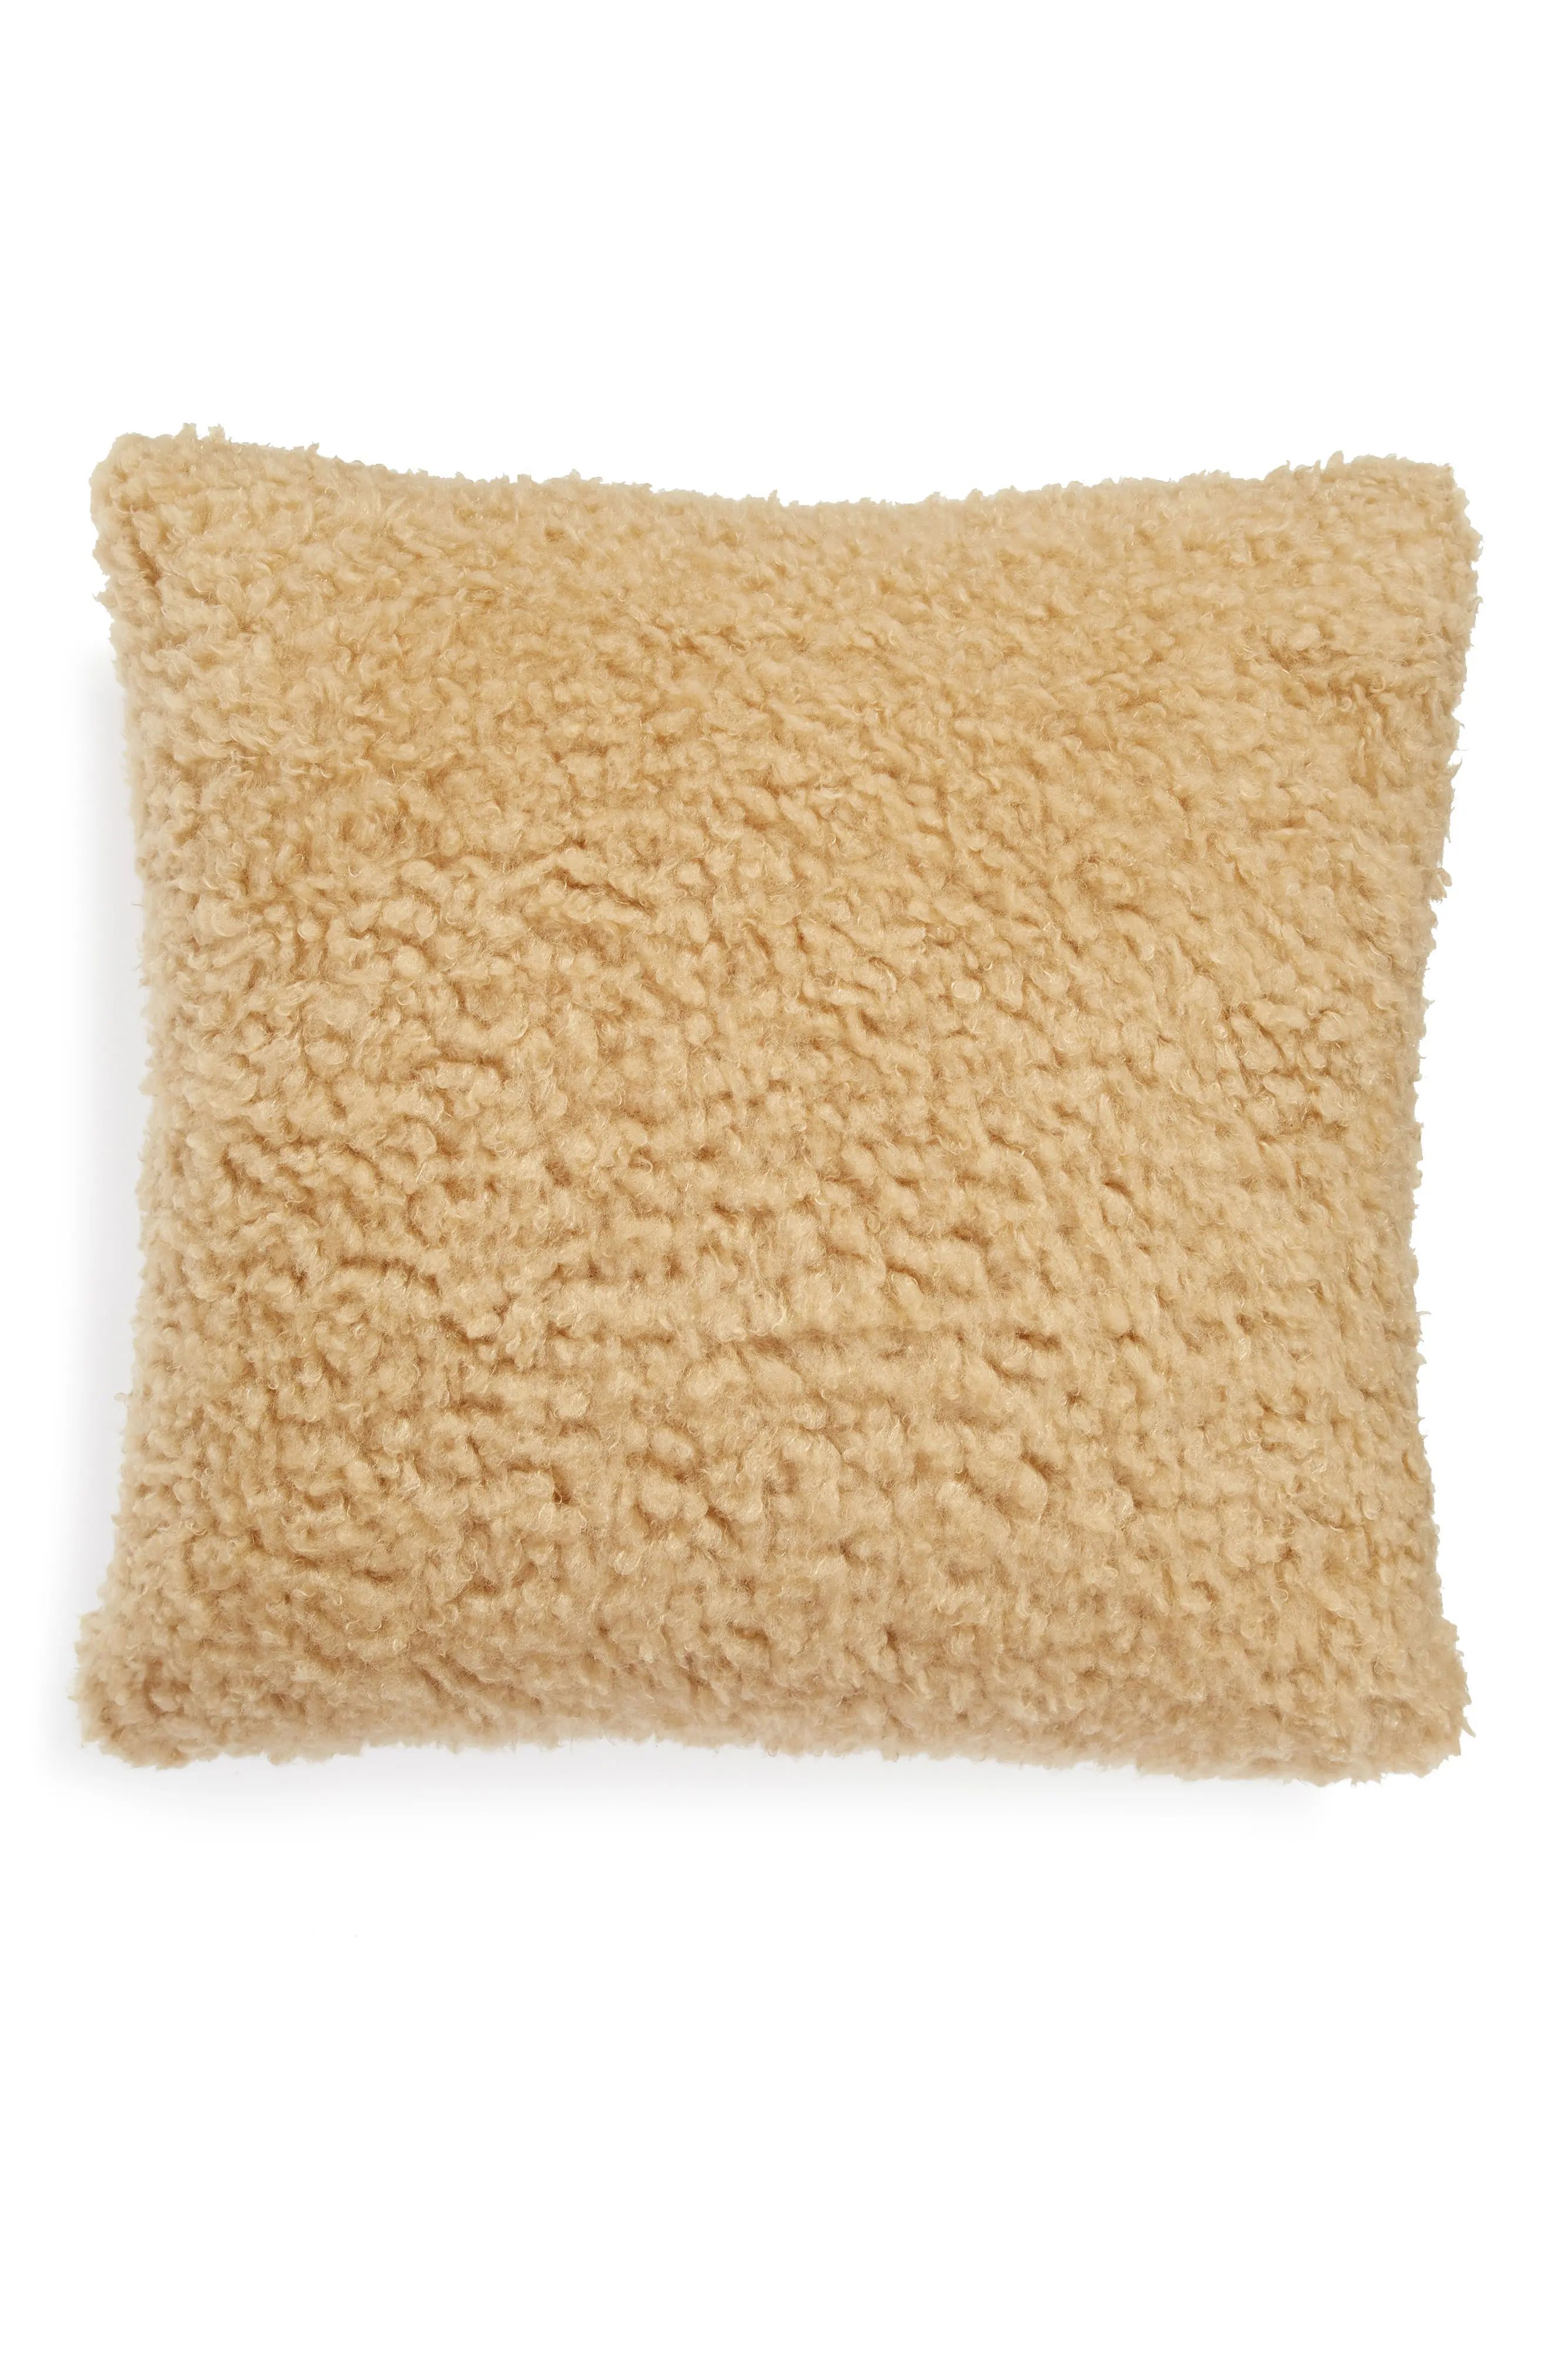 Nordstrom Teddy Faux Fur Accent Pillow in Beige Nougat at Nordstrom | Nordstrom